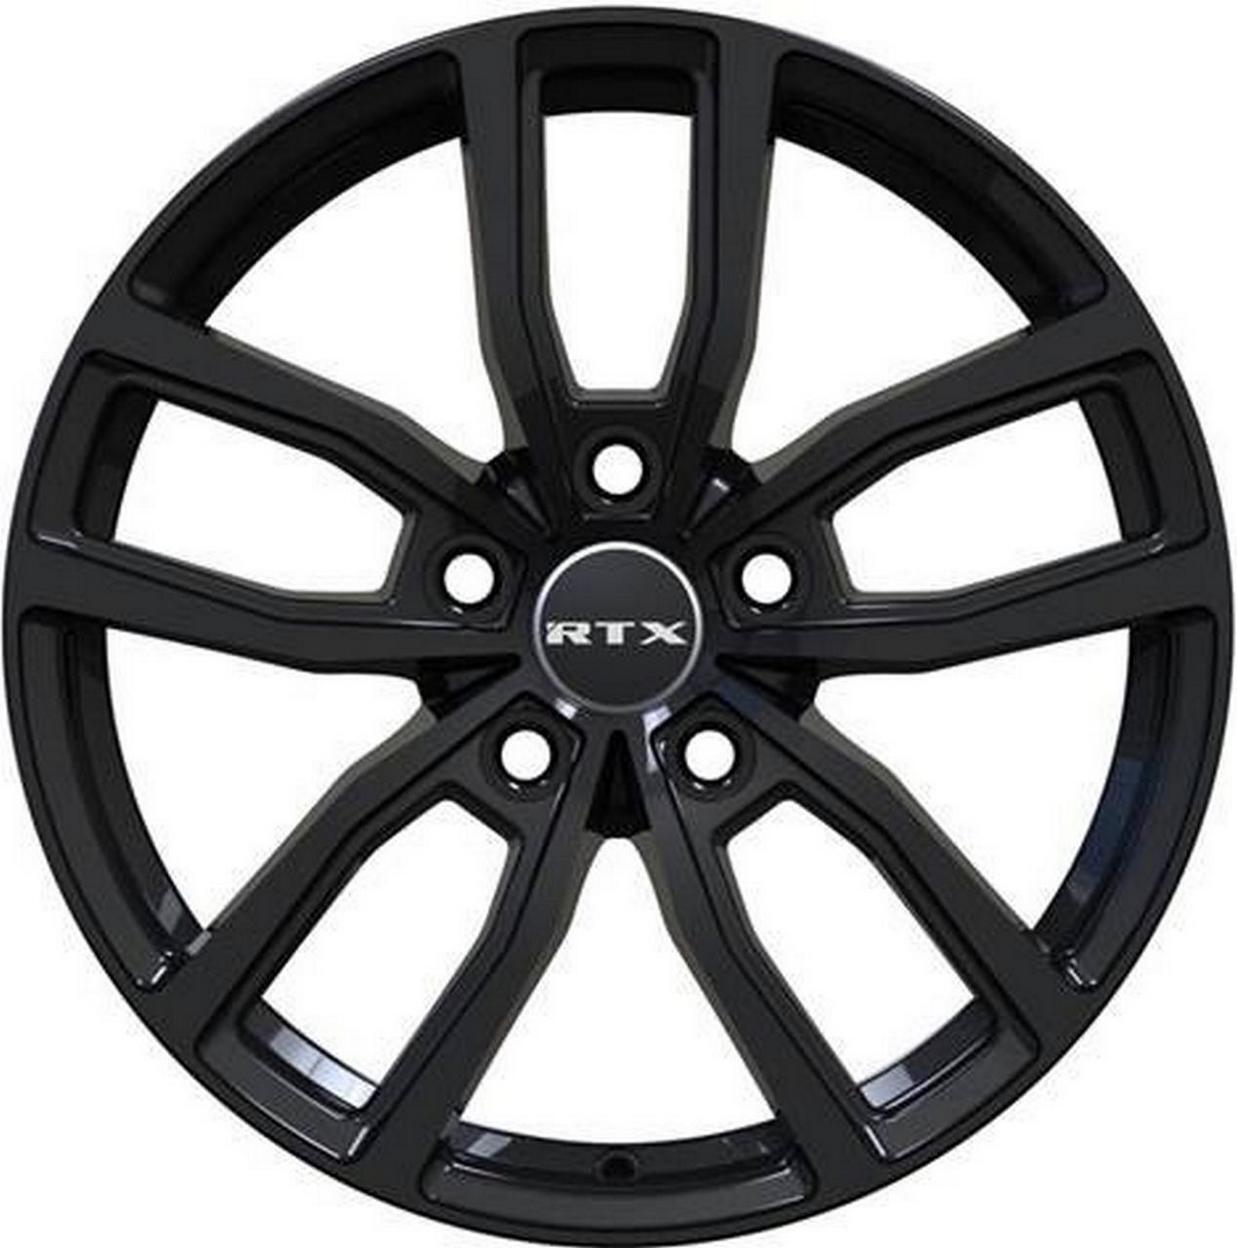 One Wheel (1) fits your 2006-2007 Toyota Tacoma | RTX (RTX) | 163703 | Solstice